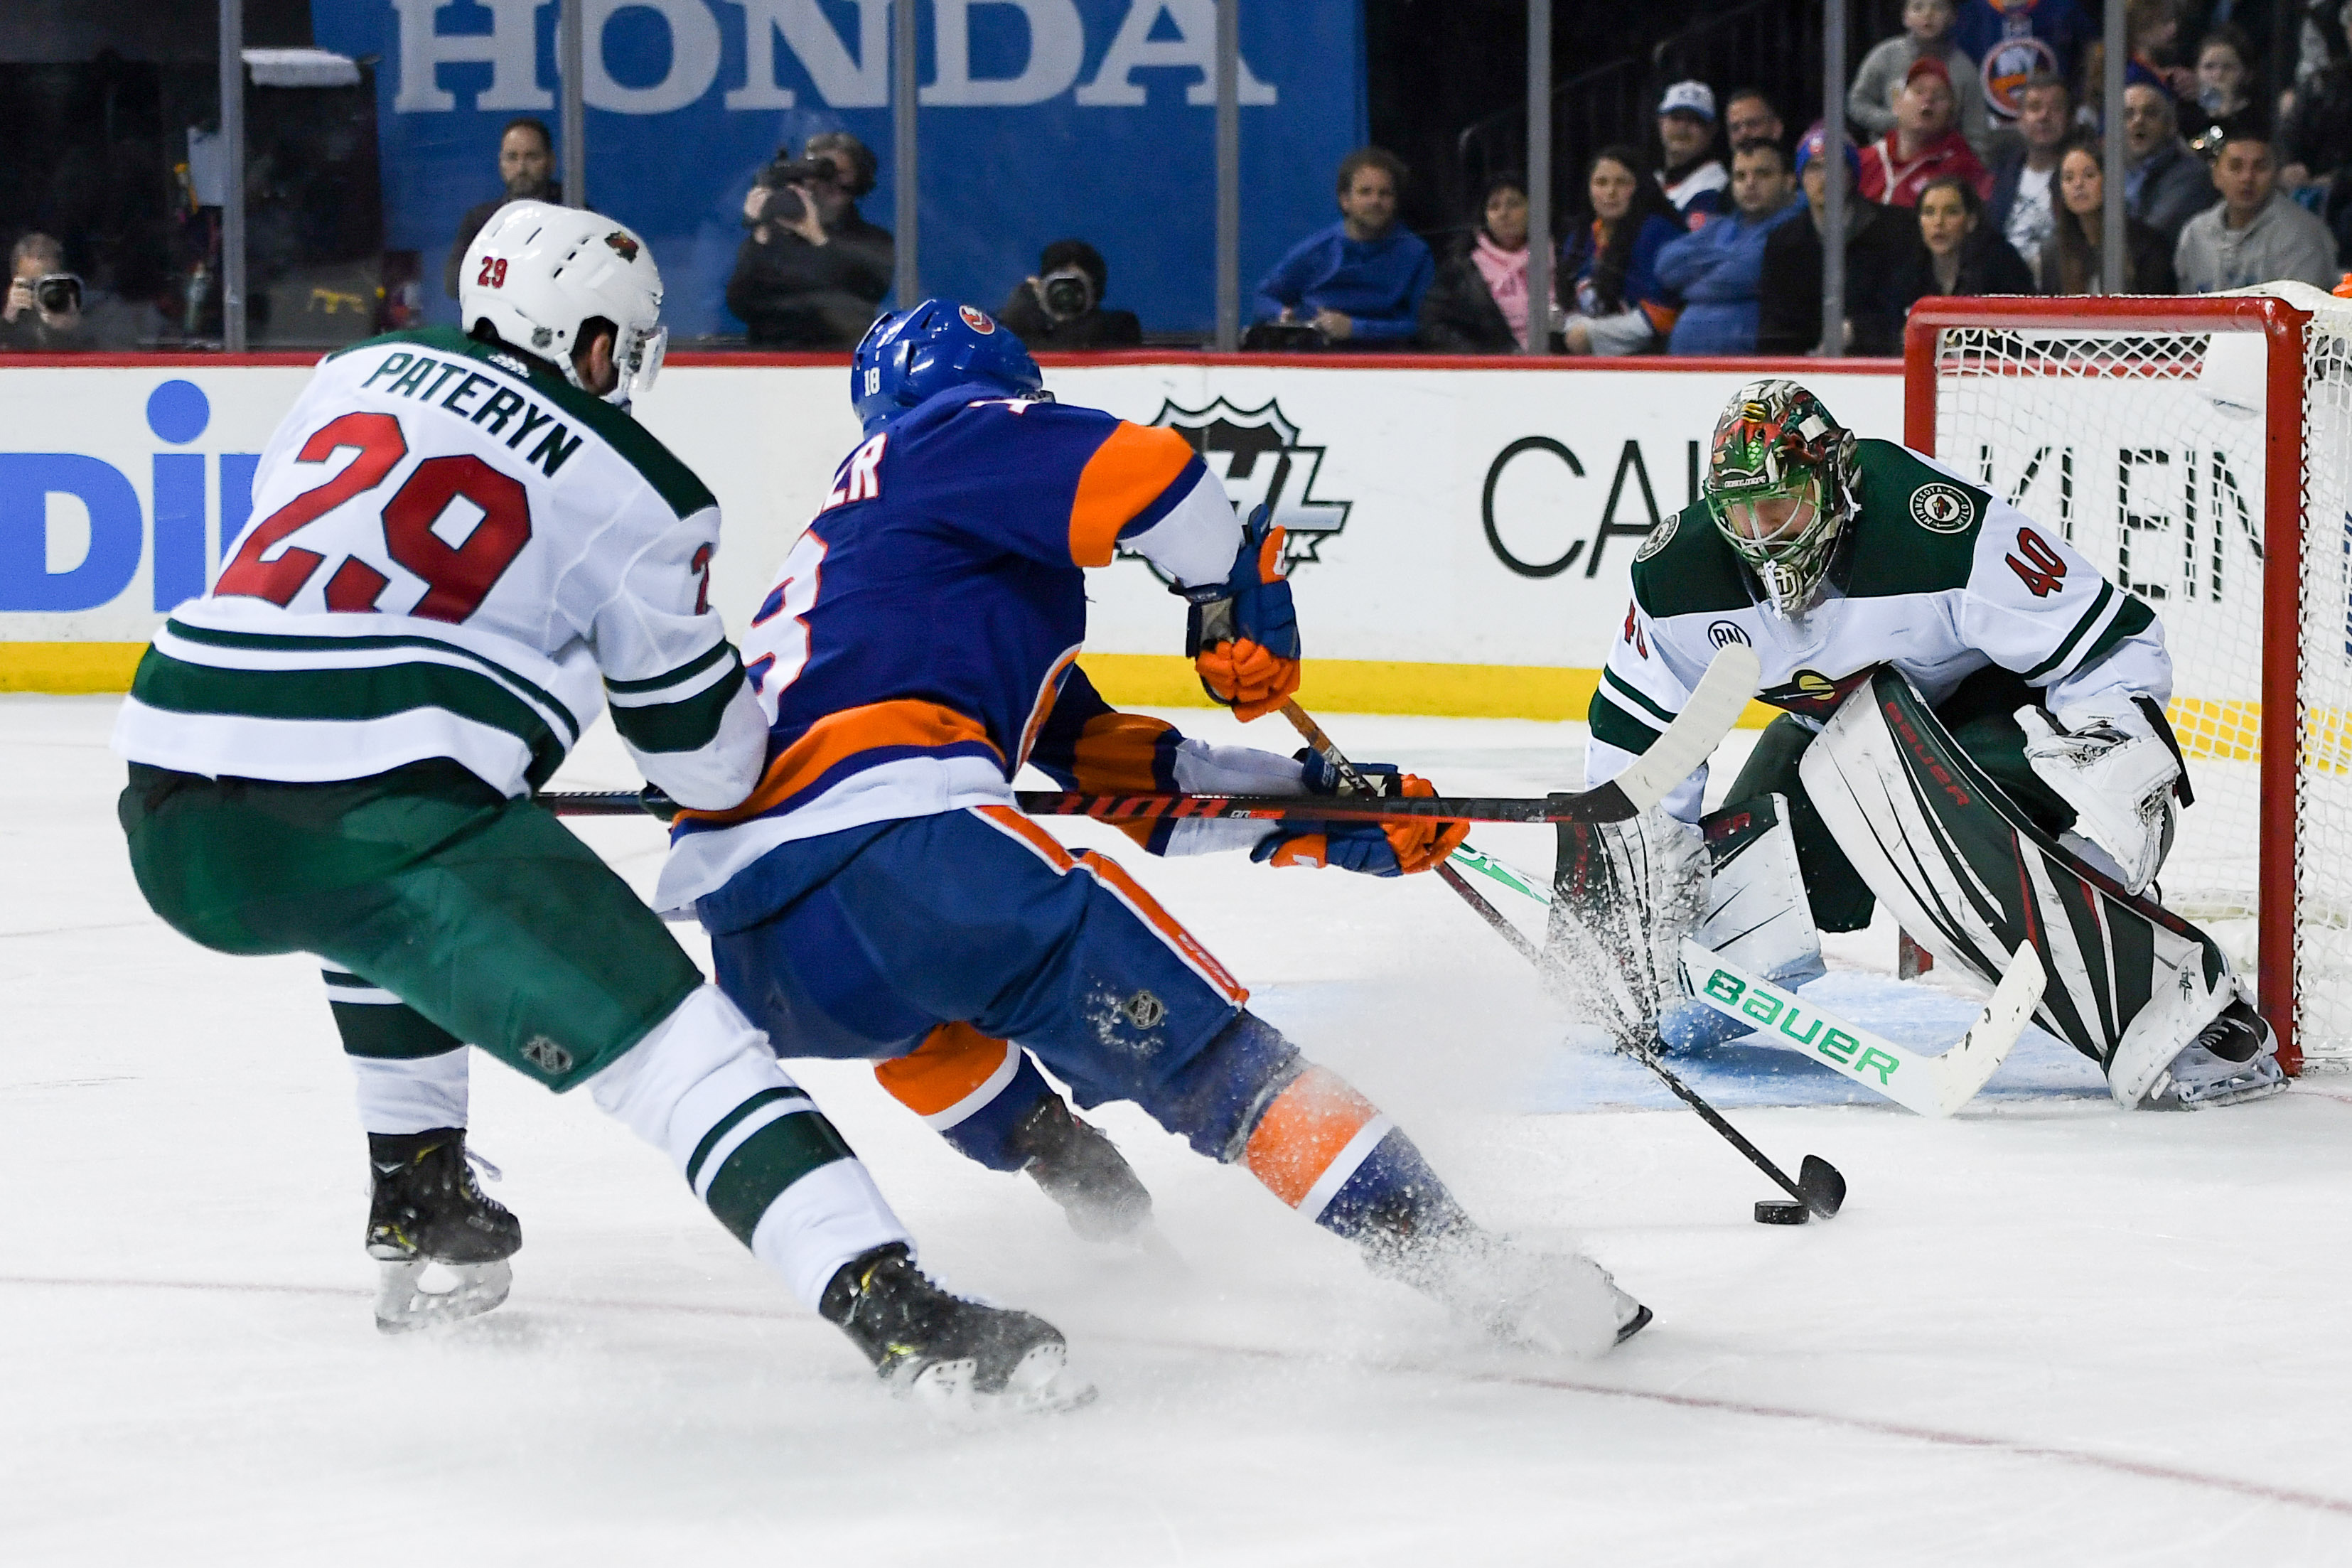 Feb 10, 2019; Brooklyn, NY, USA; New York Islanders left wing Anthony Beauvillier (18) skates with the puck around Minnesota Wild defenseman Greg Pateryn (29) as Wild goaltender Devan Dubnyk (40) defends during the second period at Barclays Center. Mandatory Credit: Dennis Schneidler-USA TODAY Sports